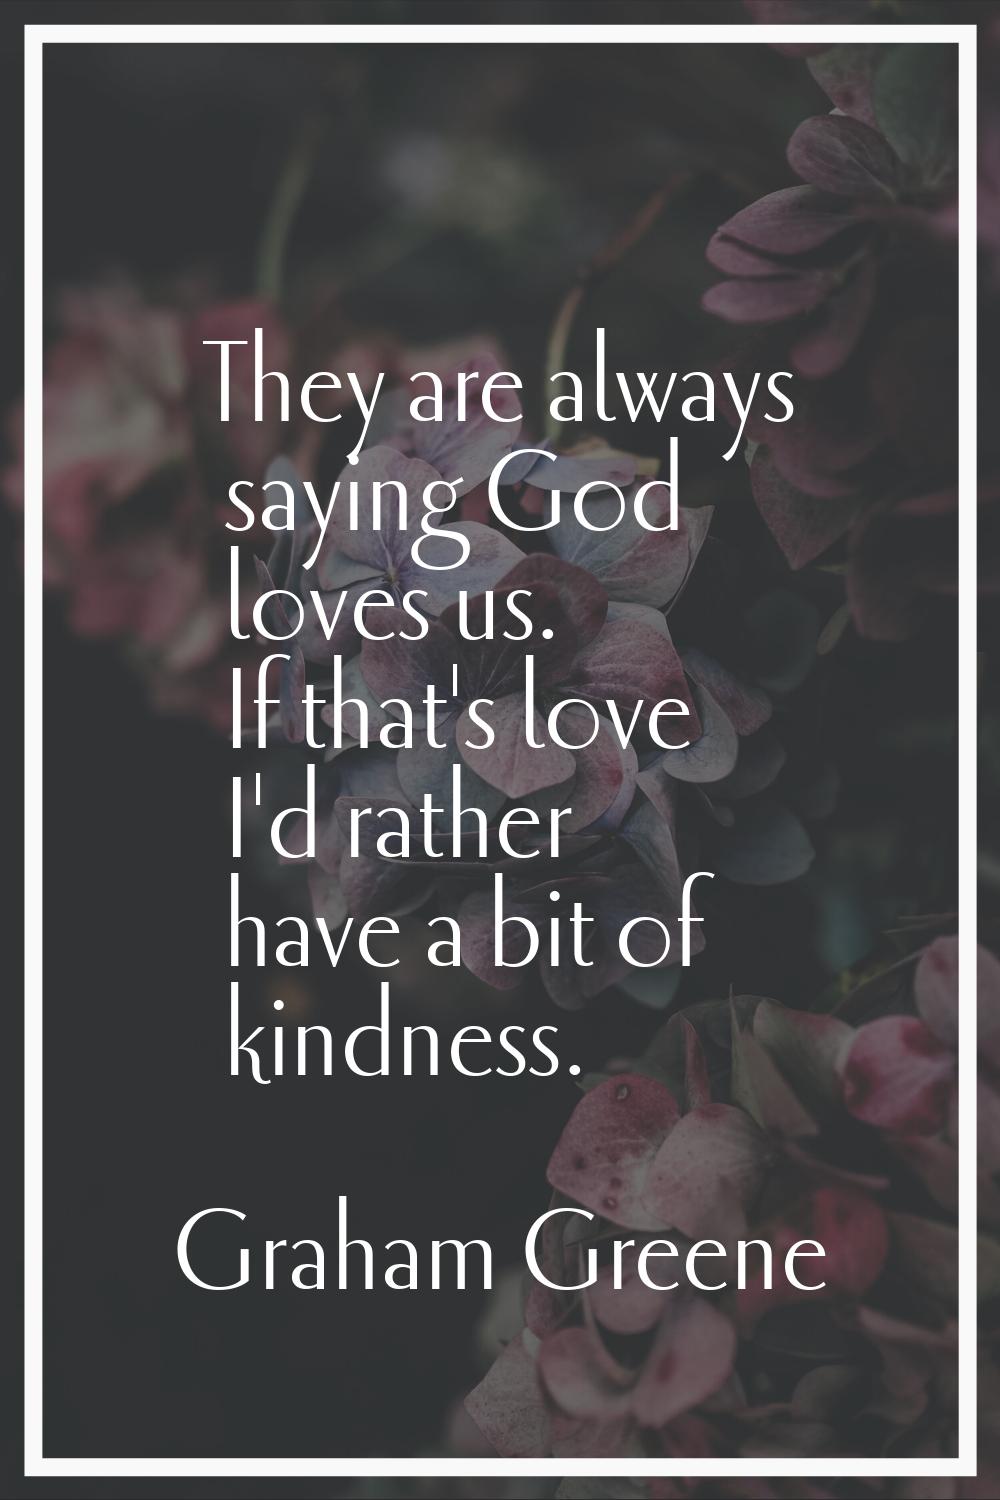 They are always saying God loves us. If that's love I'd rather have a bit of kindness.